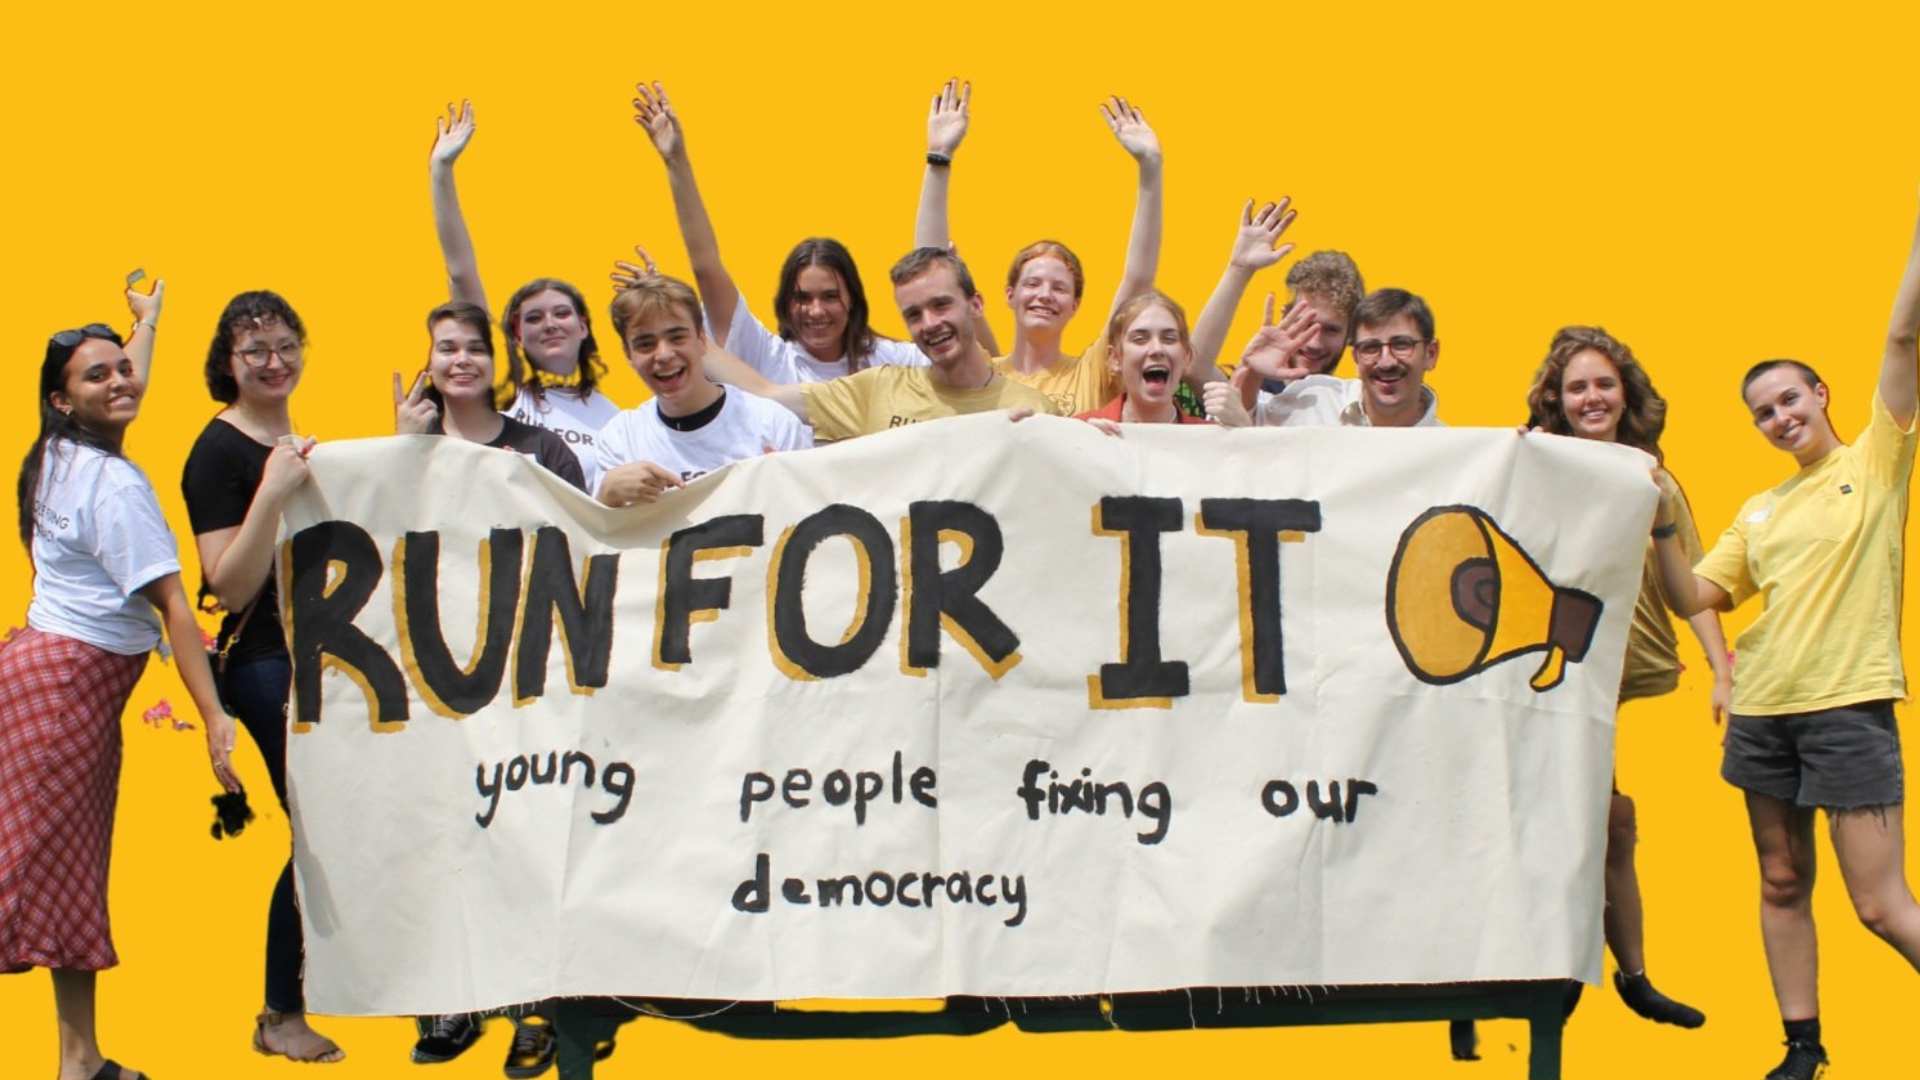 Group of young people holding up a large fabric sign reading "Run for it: young people fixing our democracy" against a bright yellow background